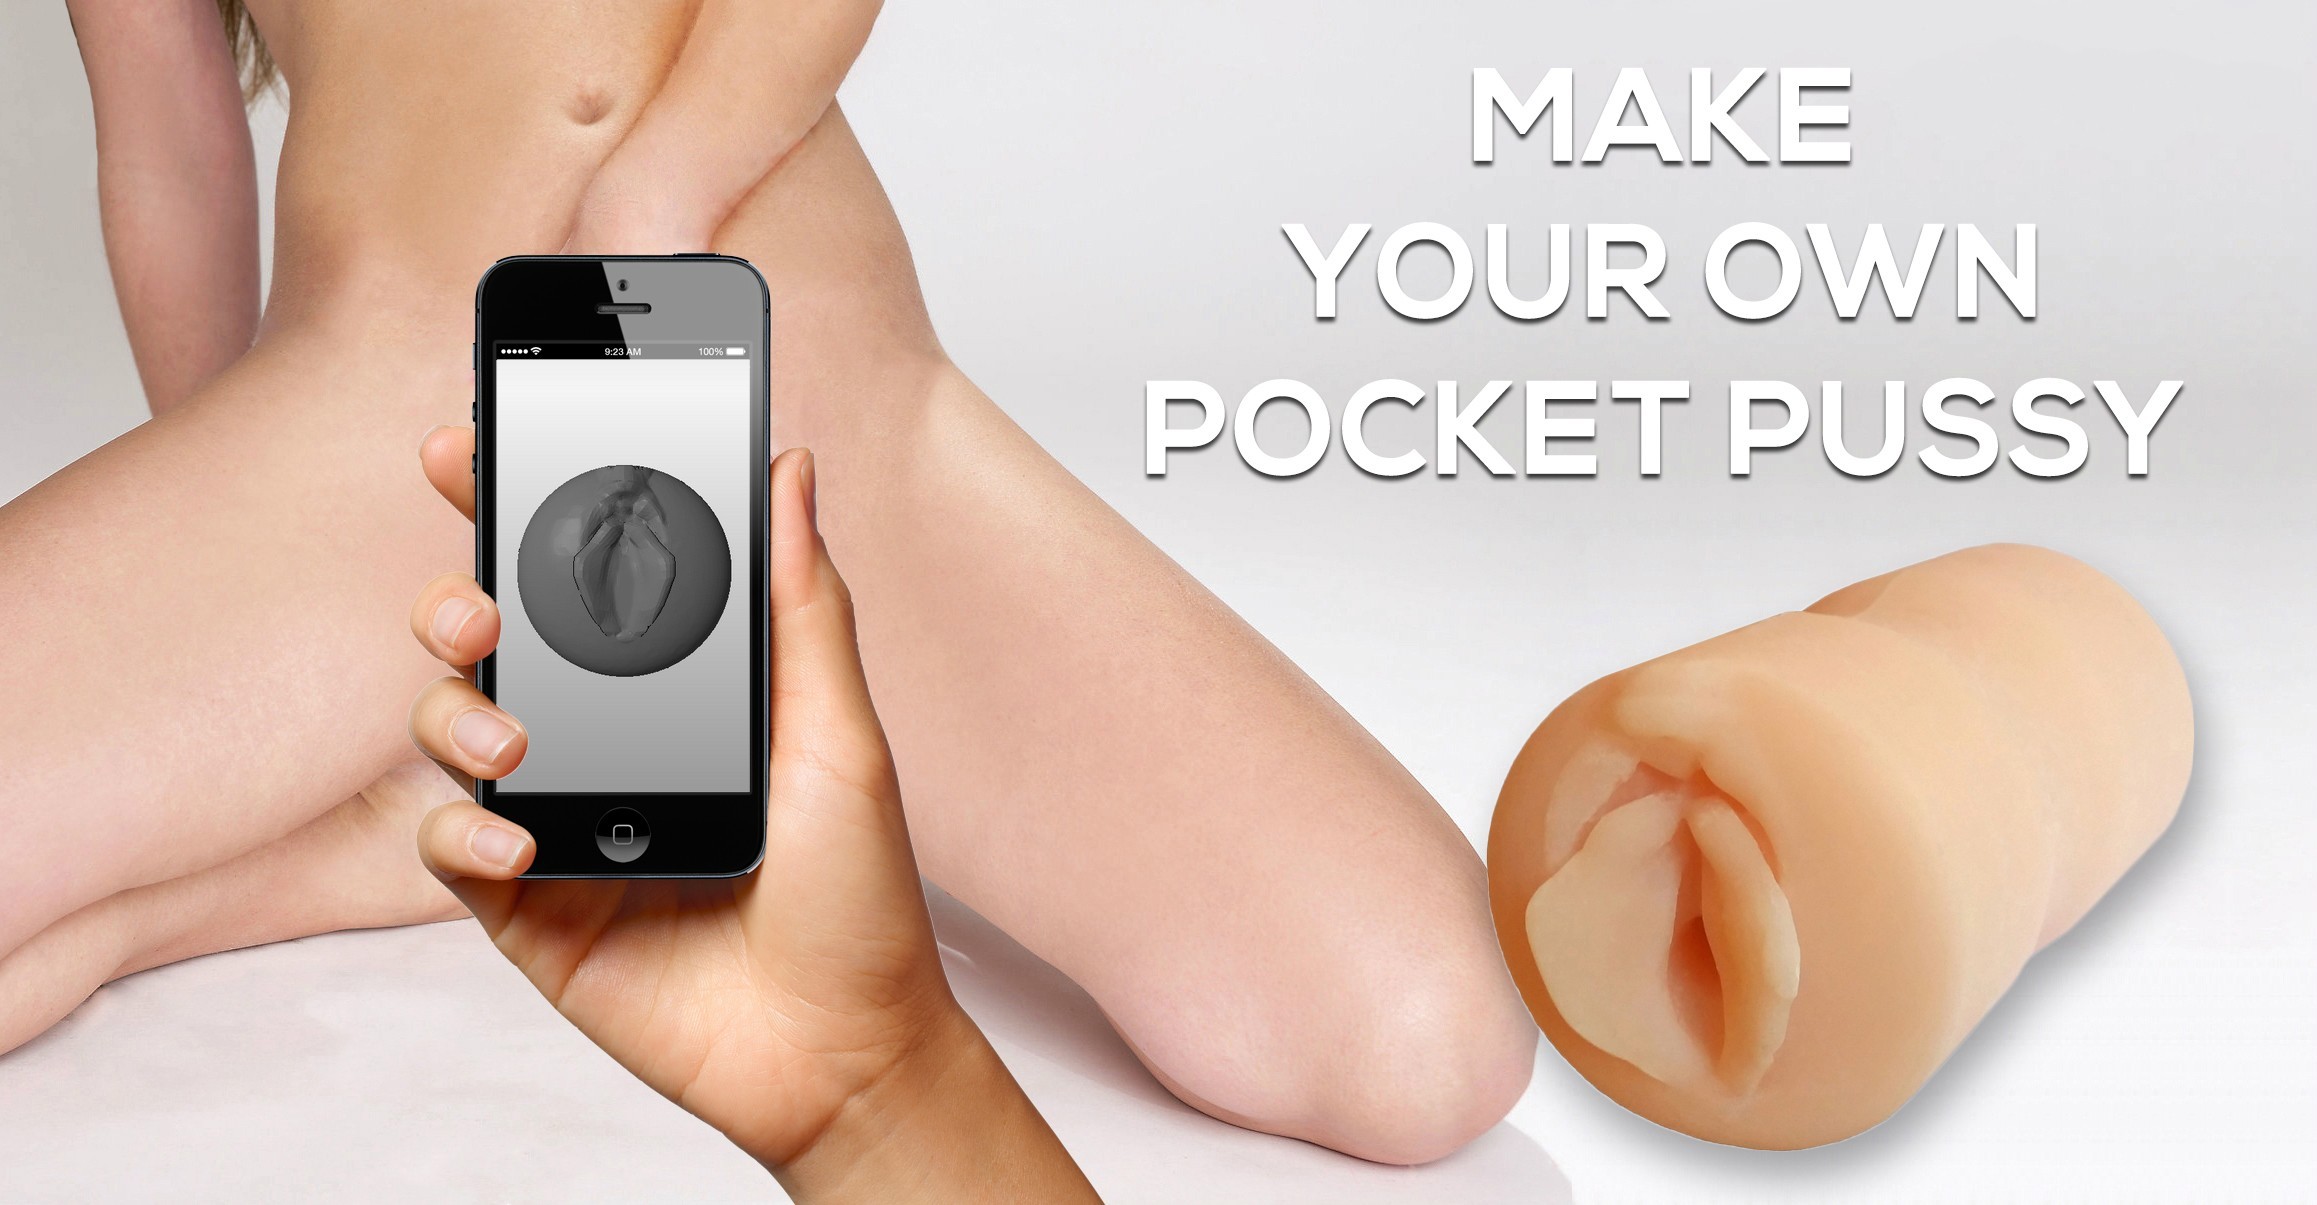 Make your own pocket pussy